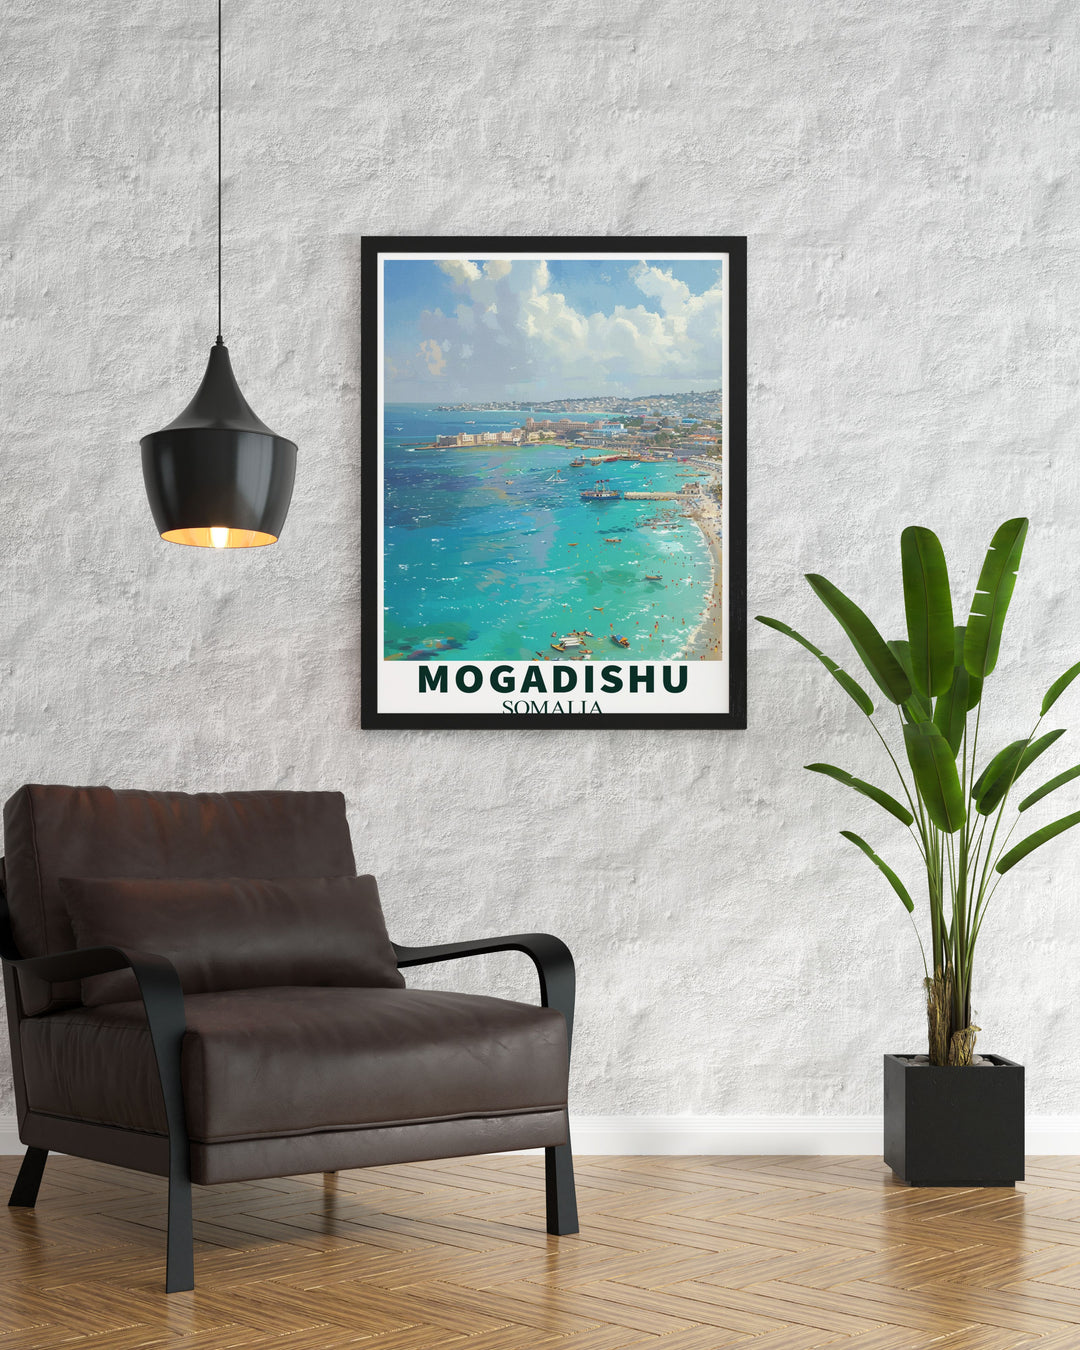 Bring the beauty of Mogadishu into your home with this detailed poster, highlighting the historical significance and coastal charm of Lido Beach in Somalias capital.